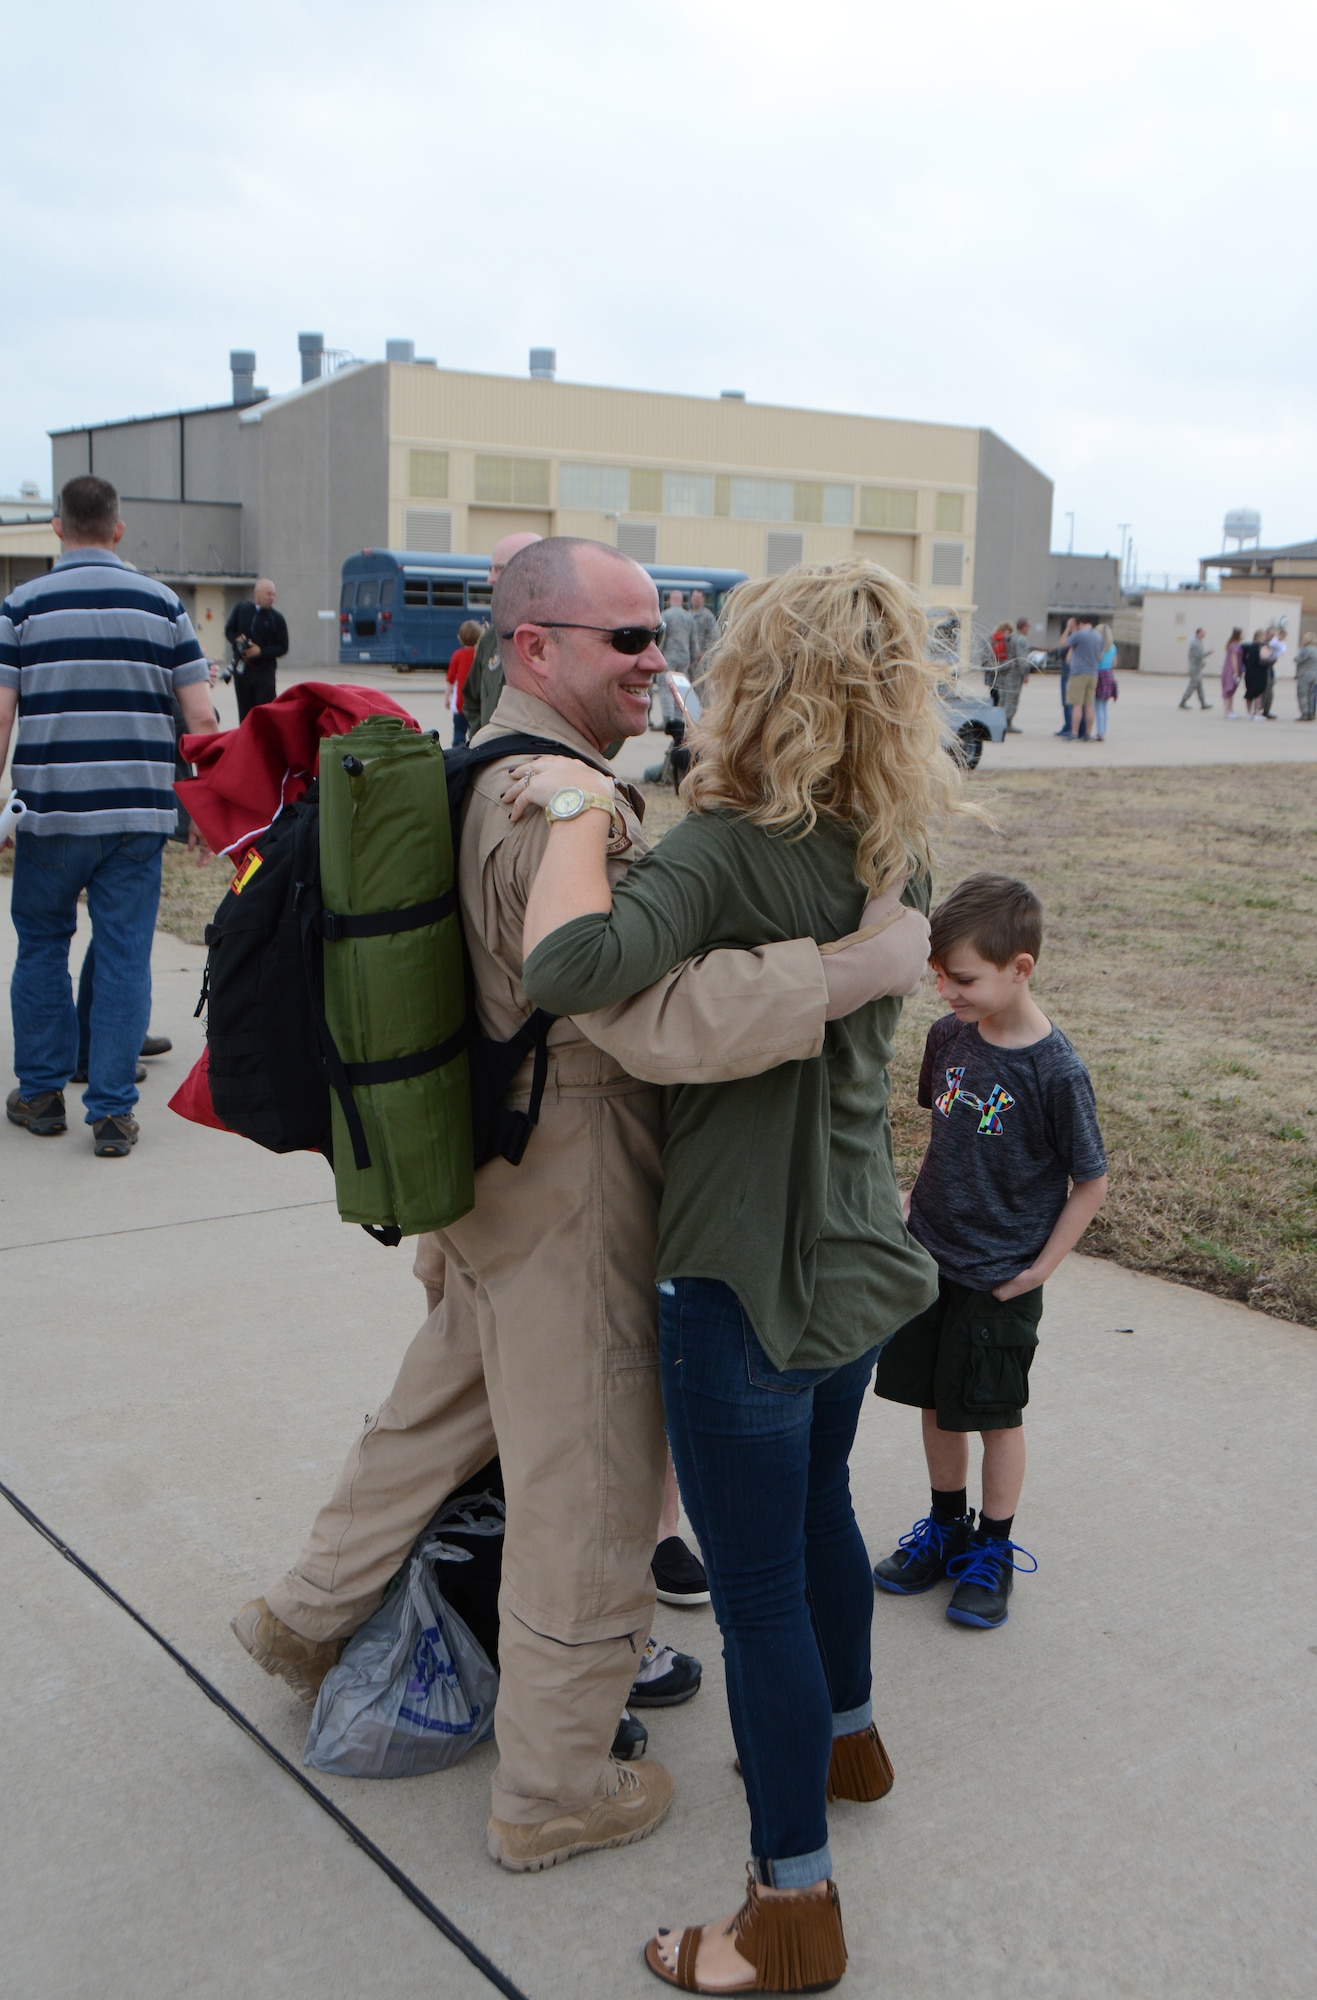 Senior Master Sgt. Durk Smith of the 465th Air Refueling Squadron hugs his wife following a deployment Feb. 19, 2017, at Tinker Air Force Base, Okla. More than 90 Reservists deployed in December 2016 in support of air operations at Incirlik Air Base, Turkey, against the Islamic State group. (U.S. Air Force photo/Tech. Sgt. Lauren Gleason)